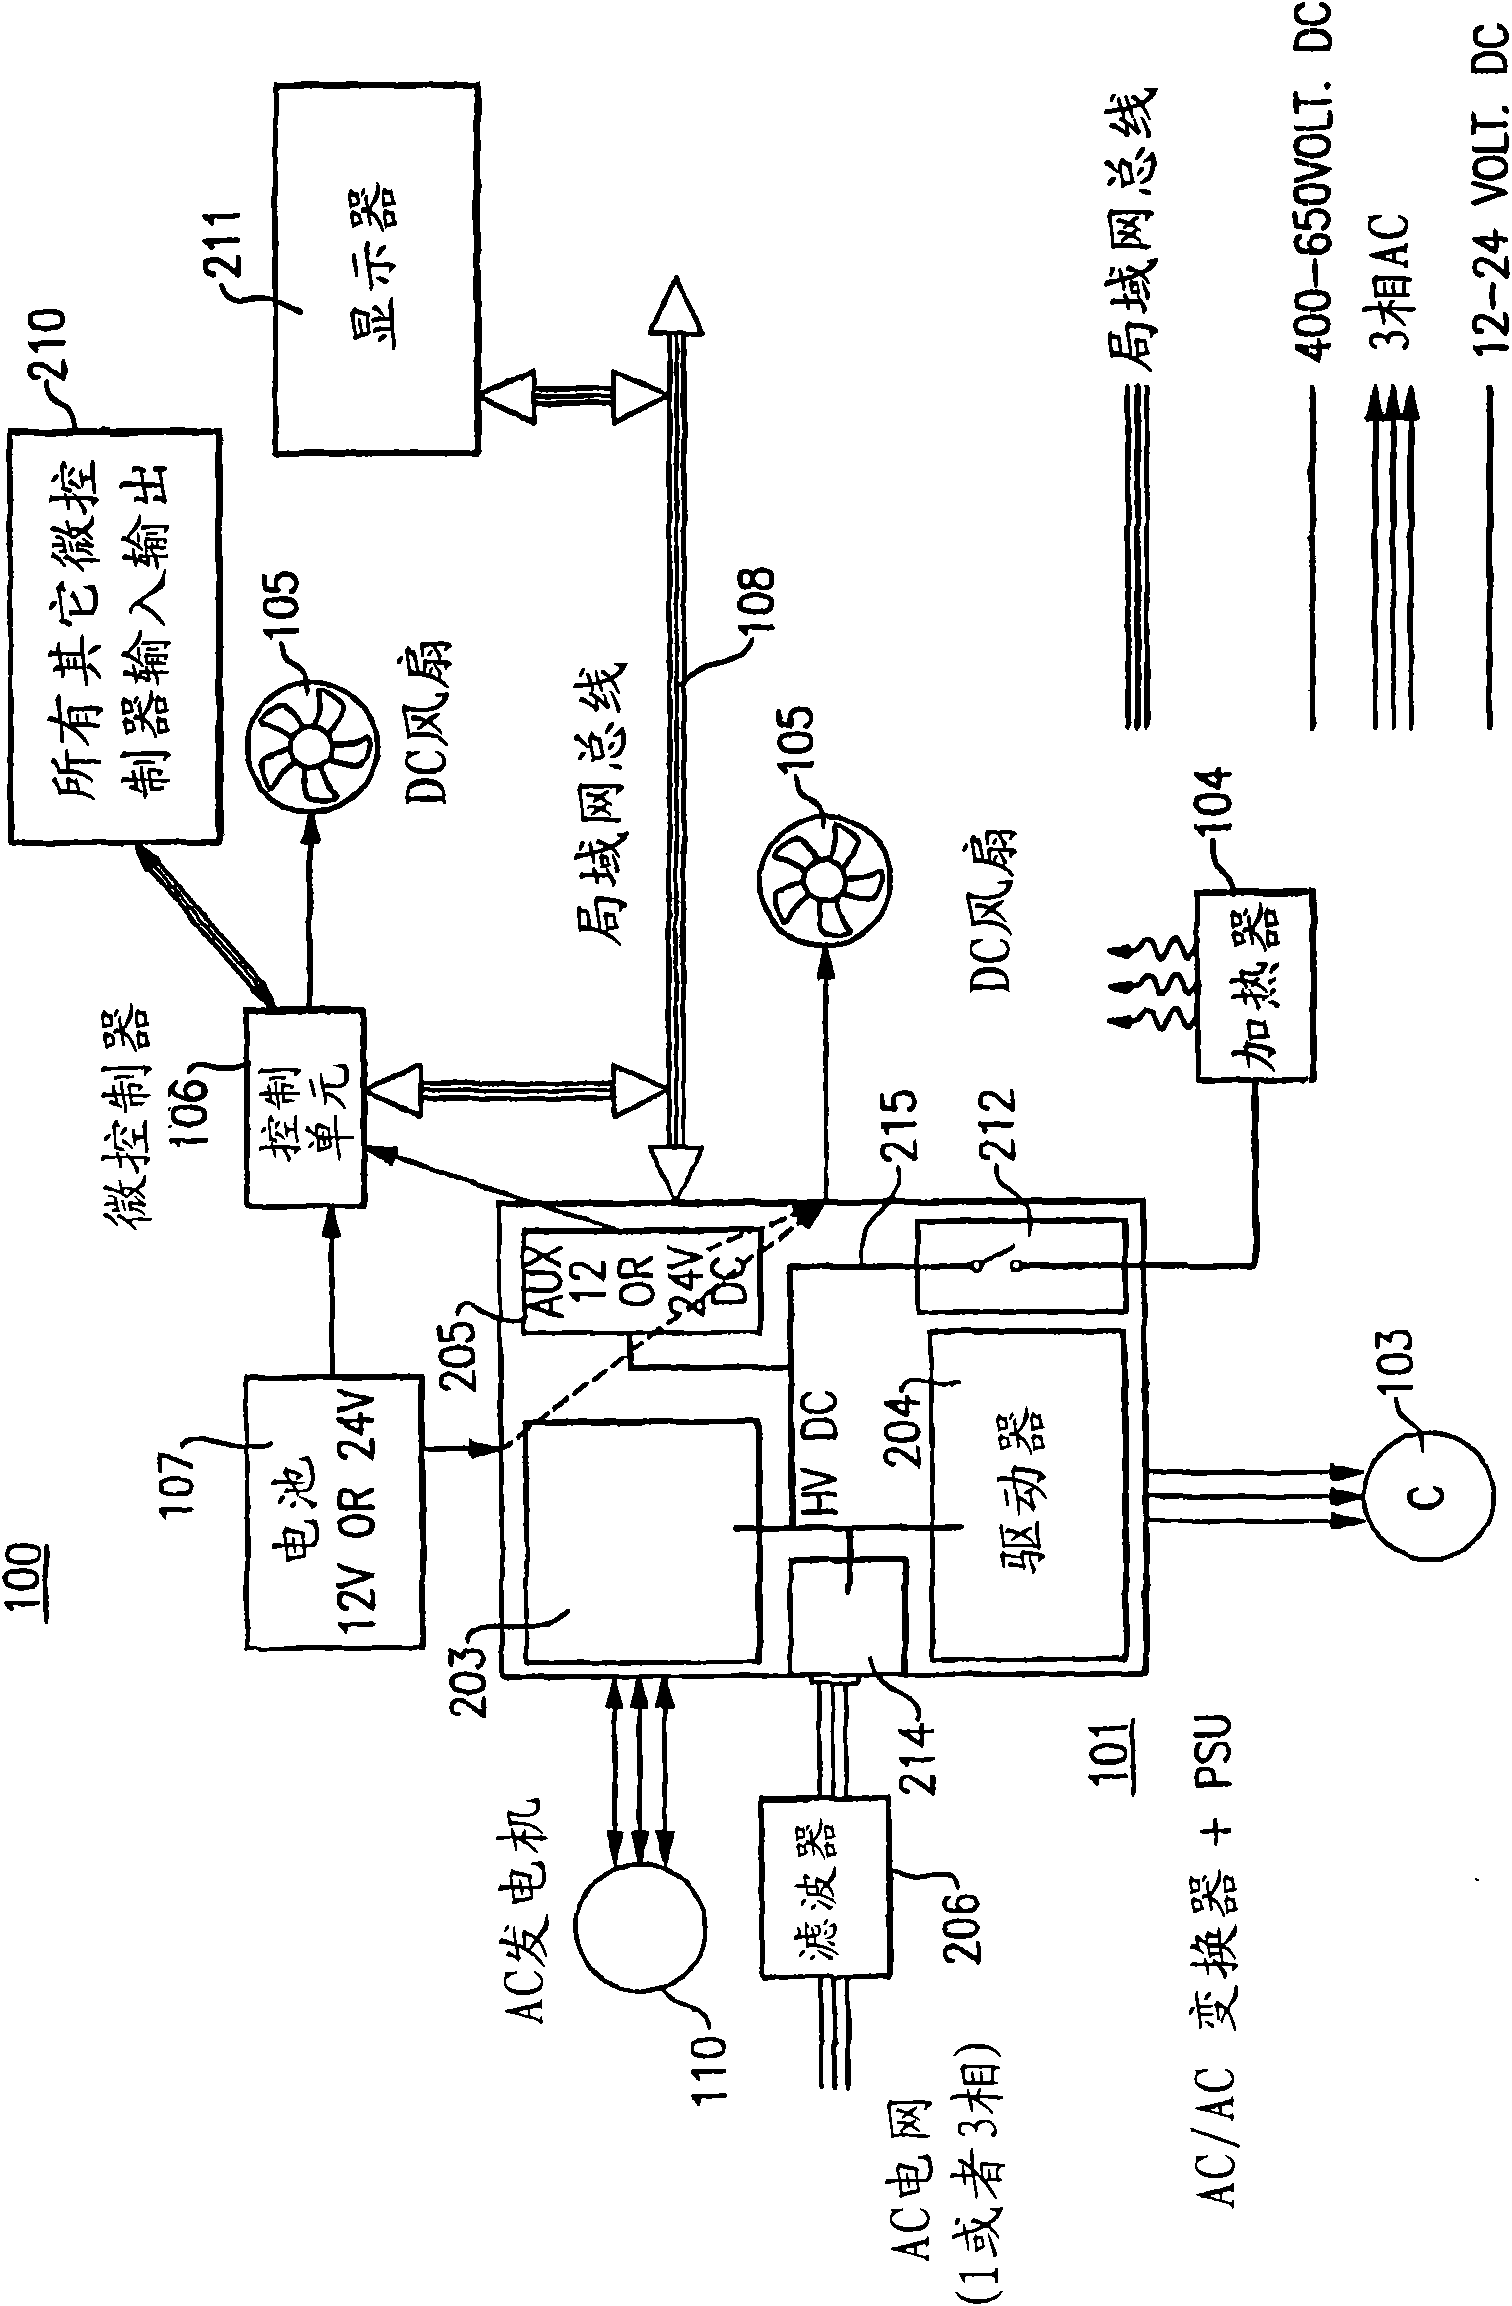 Integrated multiple power conversion system for transport refrigeration units